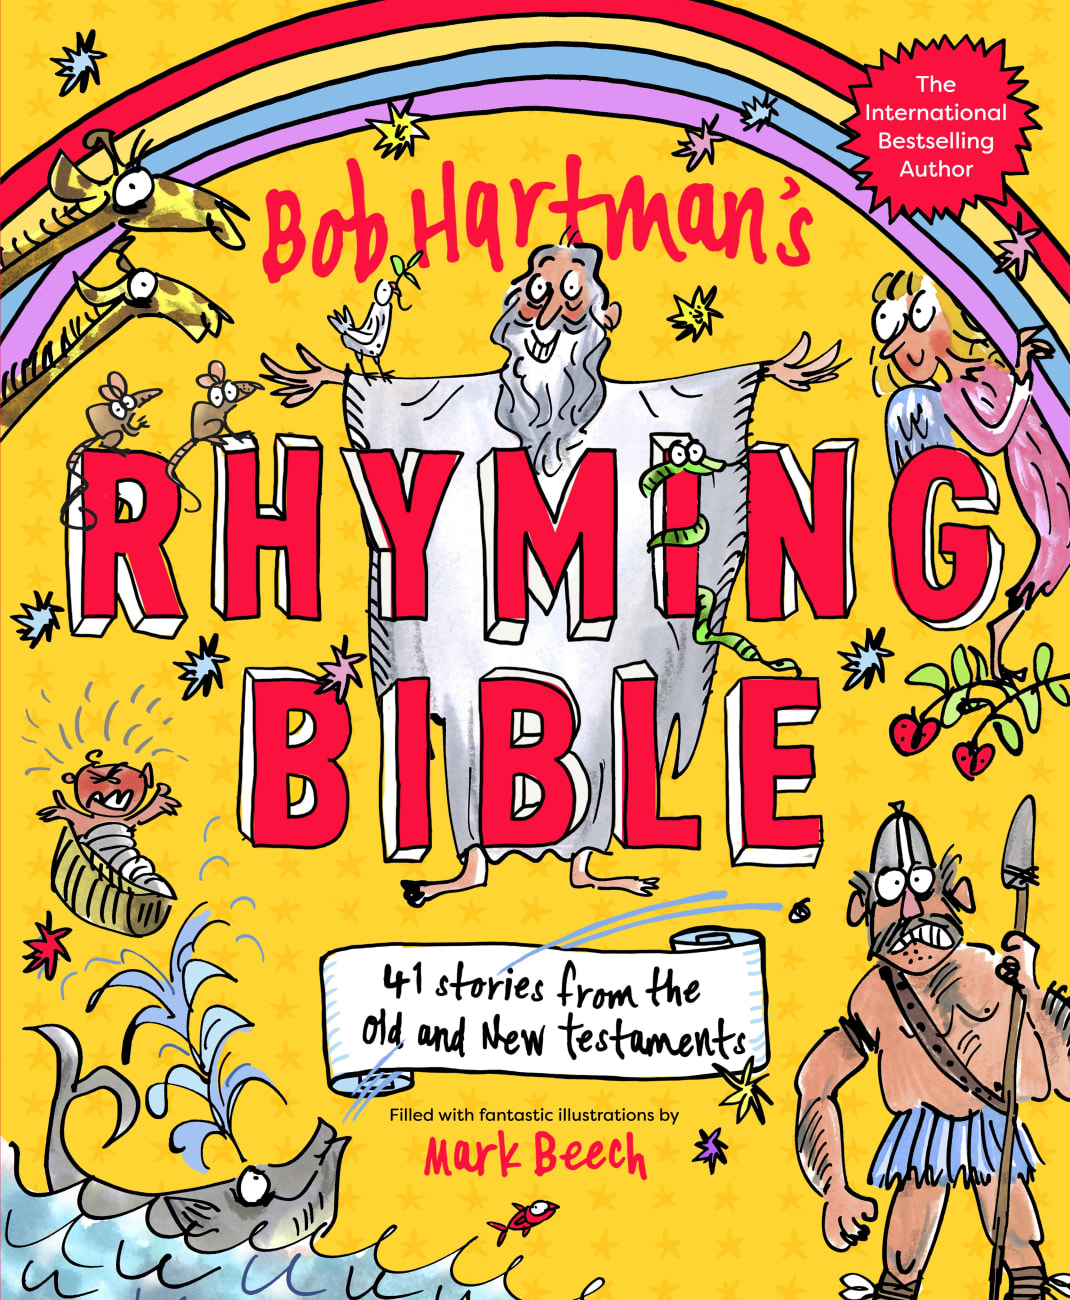 Bob Hartman's Rhyming Bible: 41 Stories From the Old and New Testaments Hardback